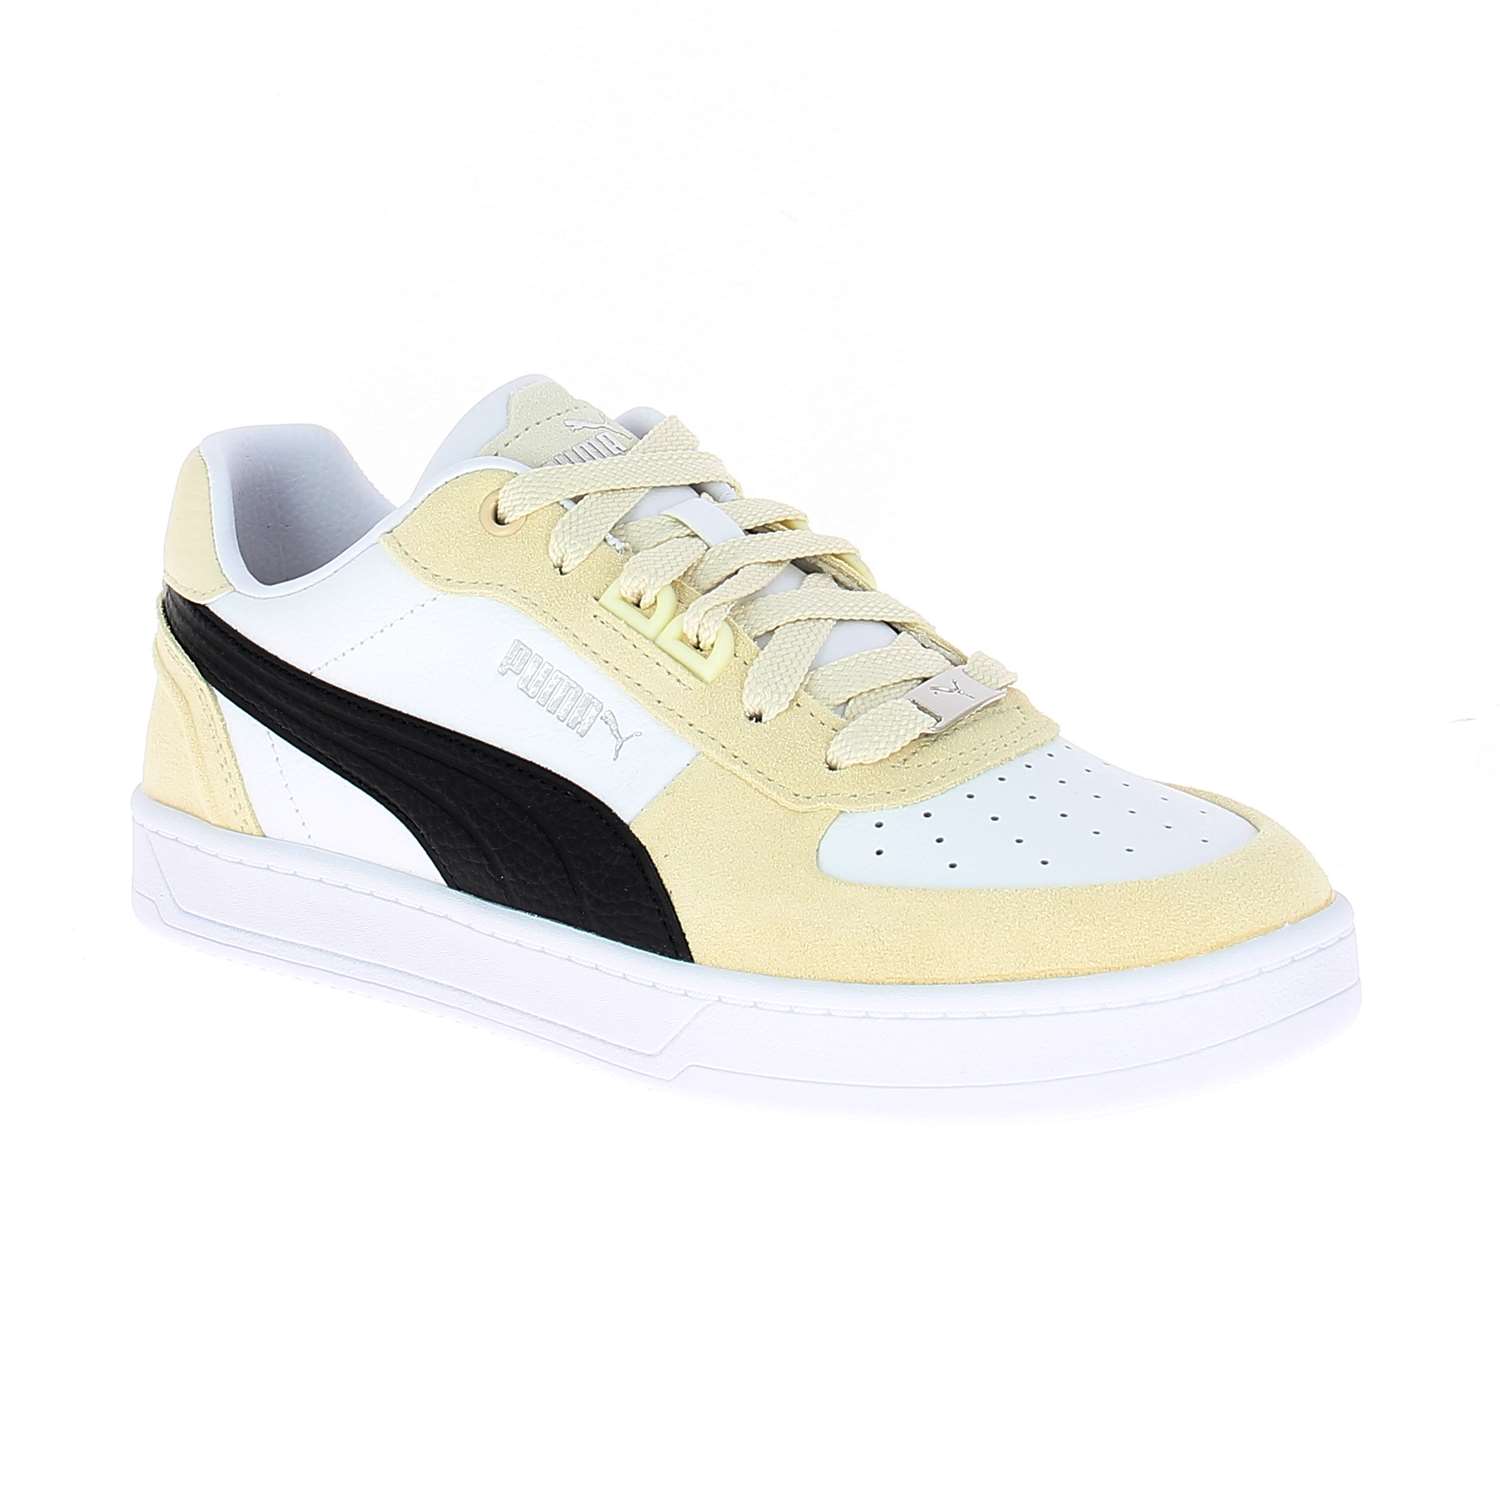 01 - CAVEN 2 LUXE - PUMA -  - Synthétique